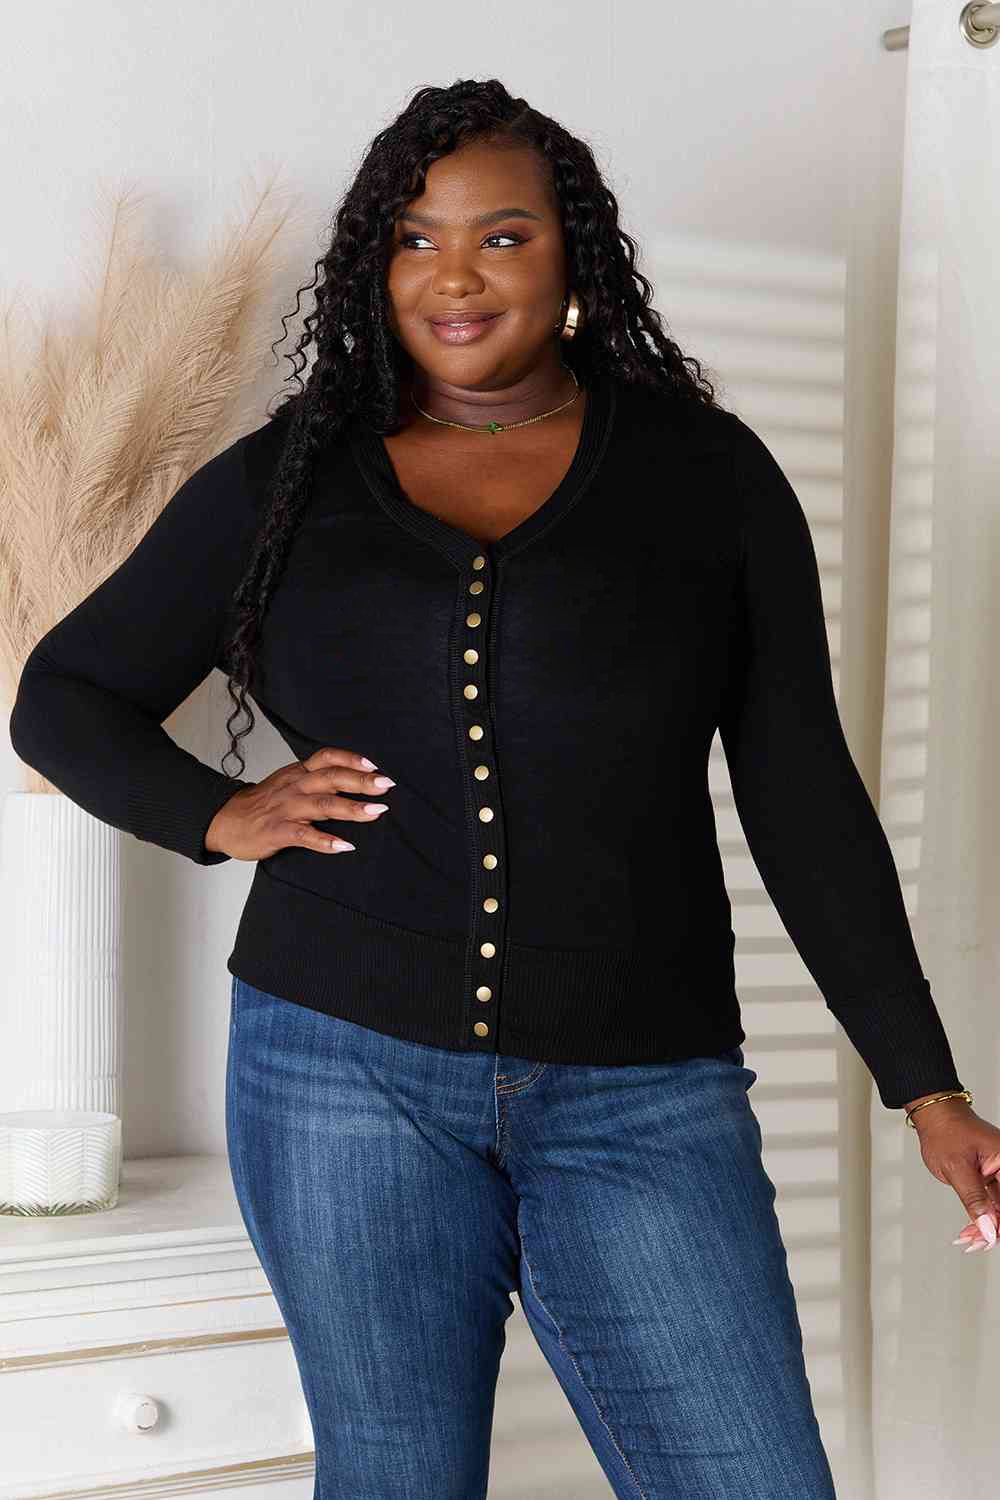 The Cool Factor V-Neck Long Sleeve Cardigan Top in Black